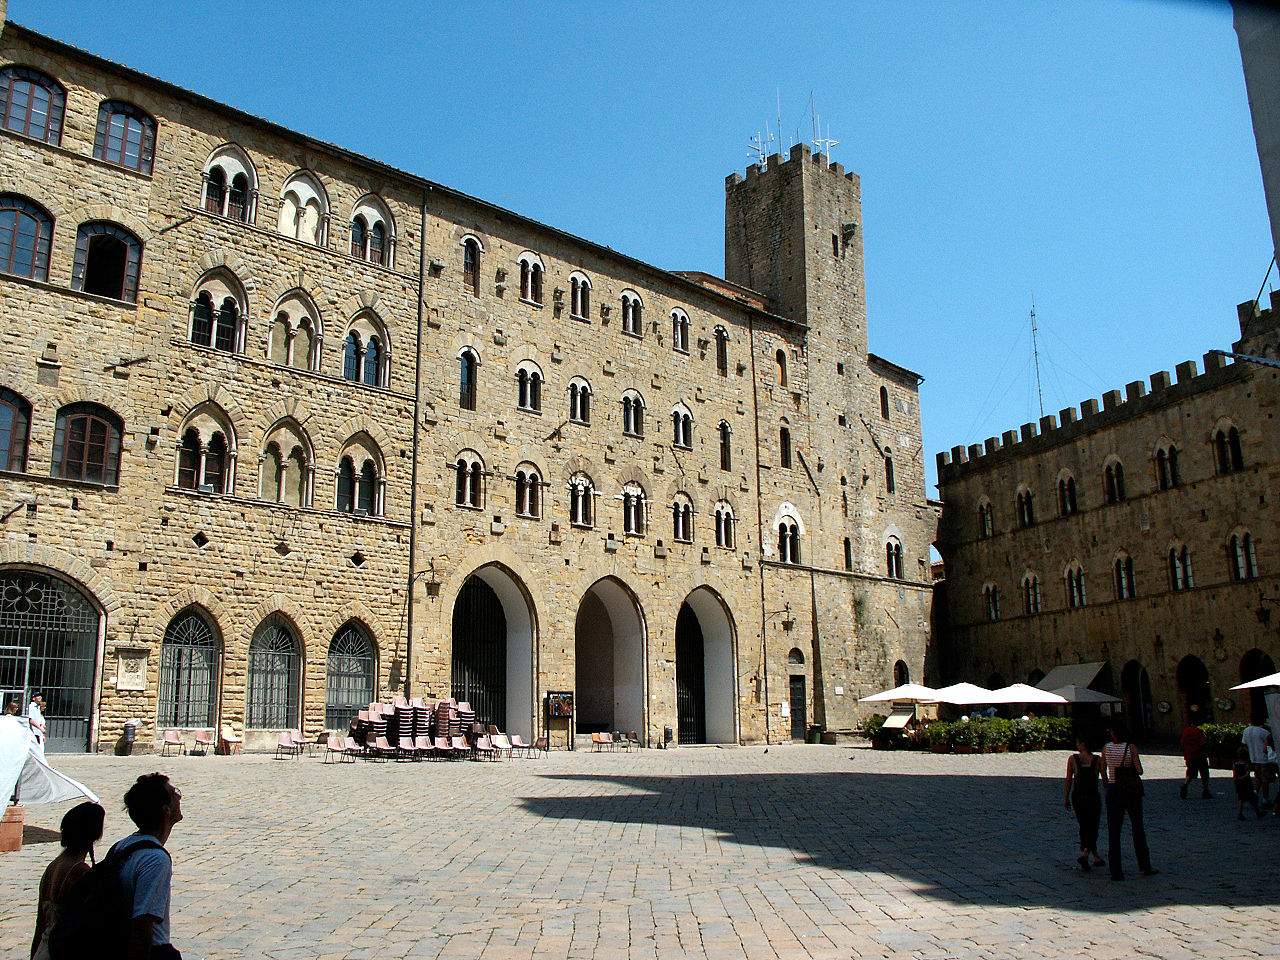 Volterra, for three years ban on opening new bars and restaurants in historic center